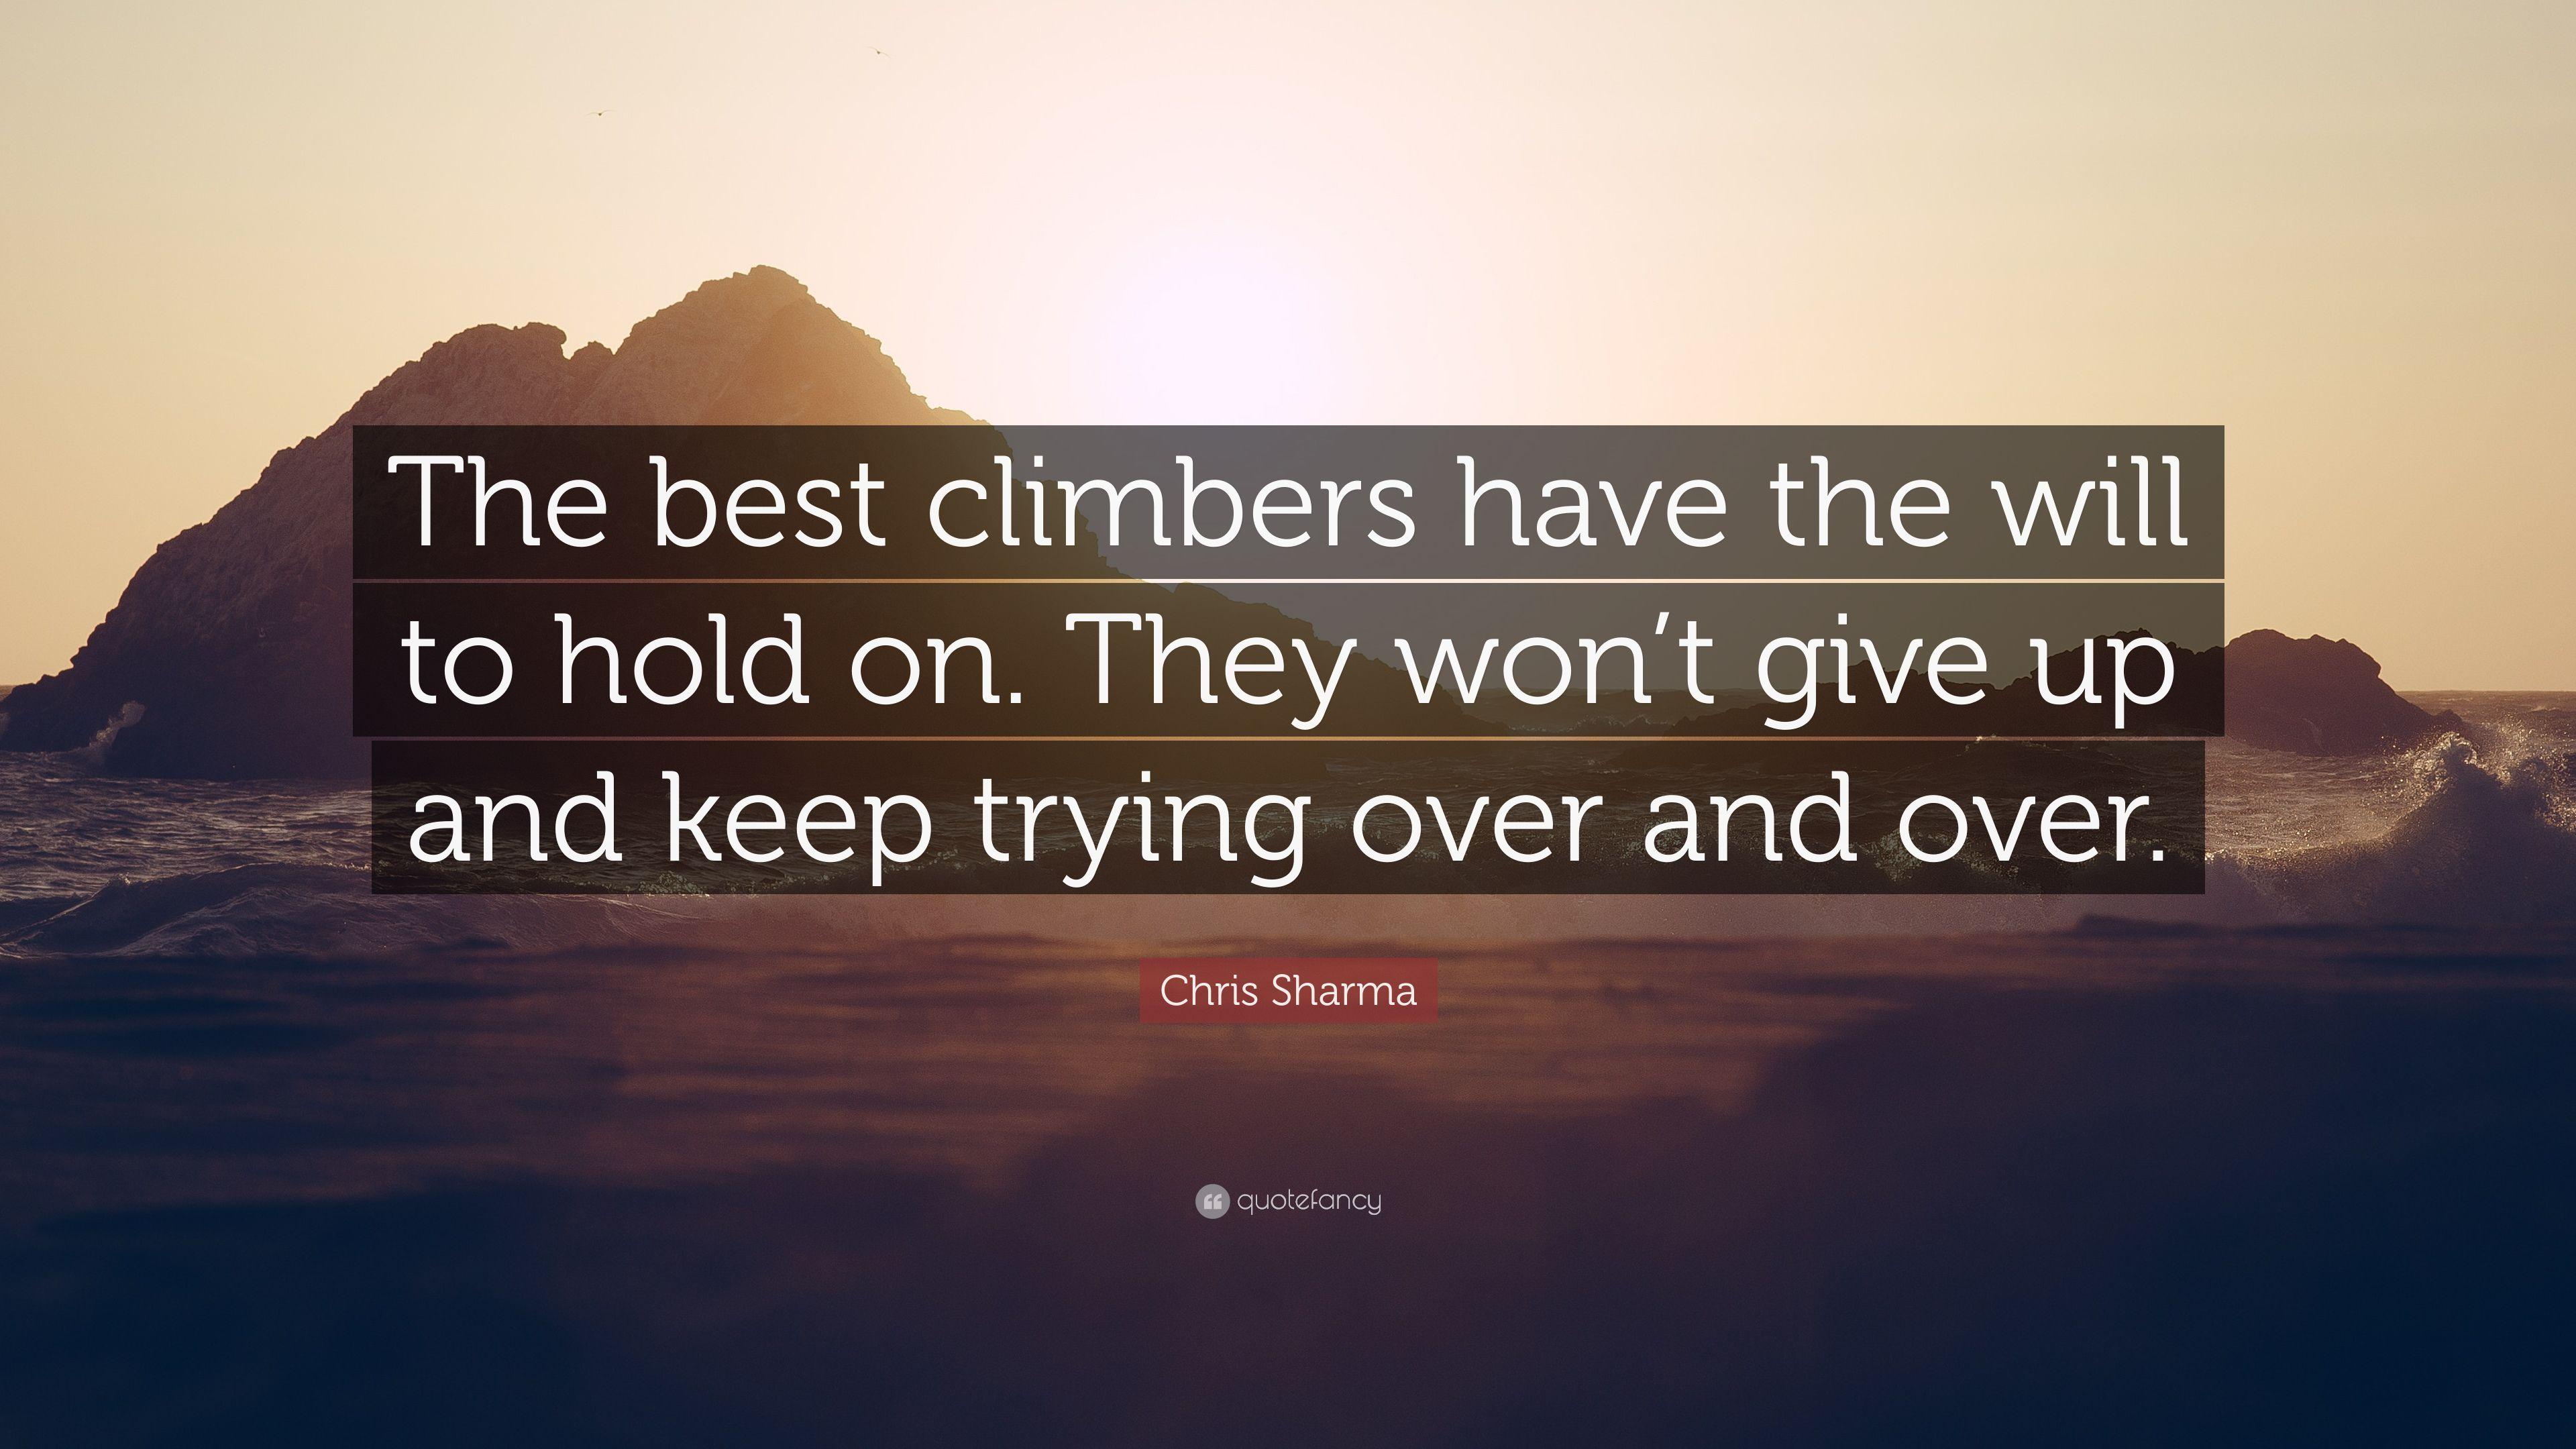 Chris Sharma Quote: "The best climbers have the will to hold on.